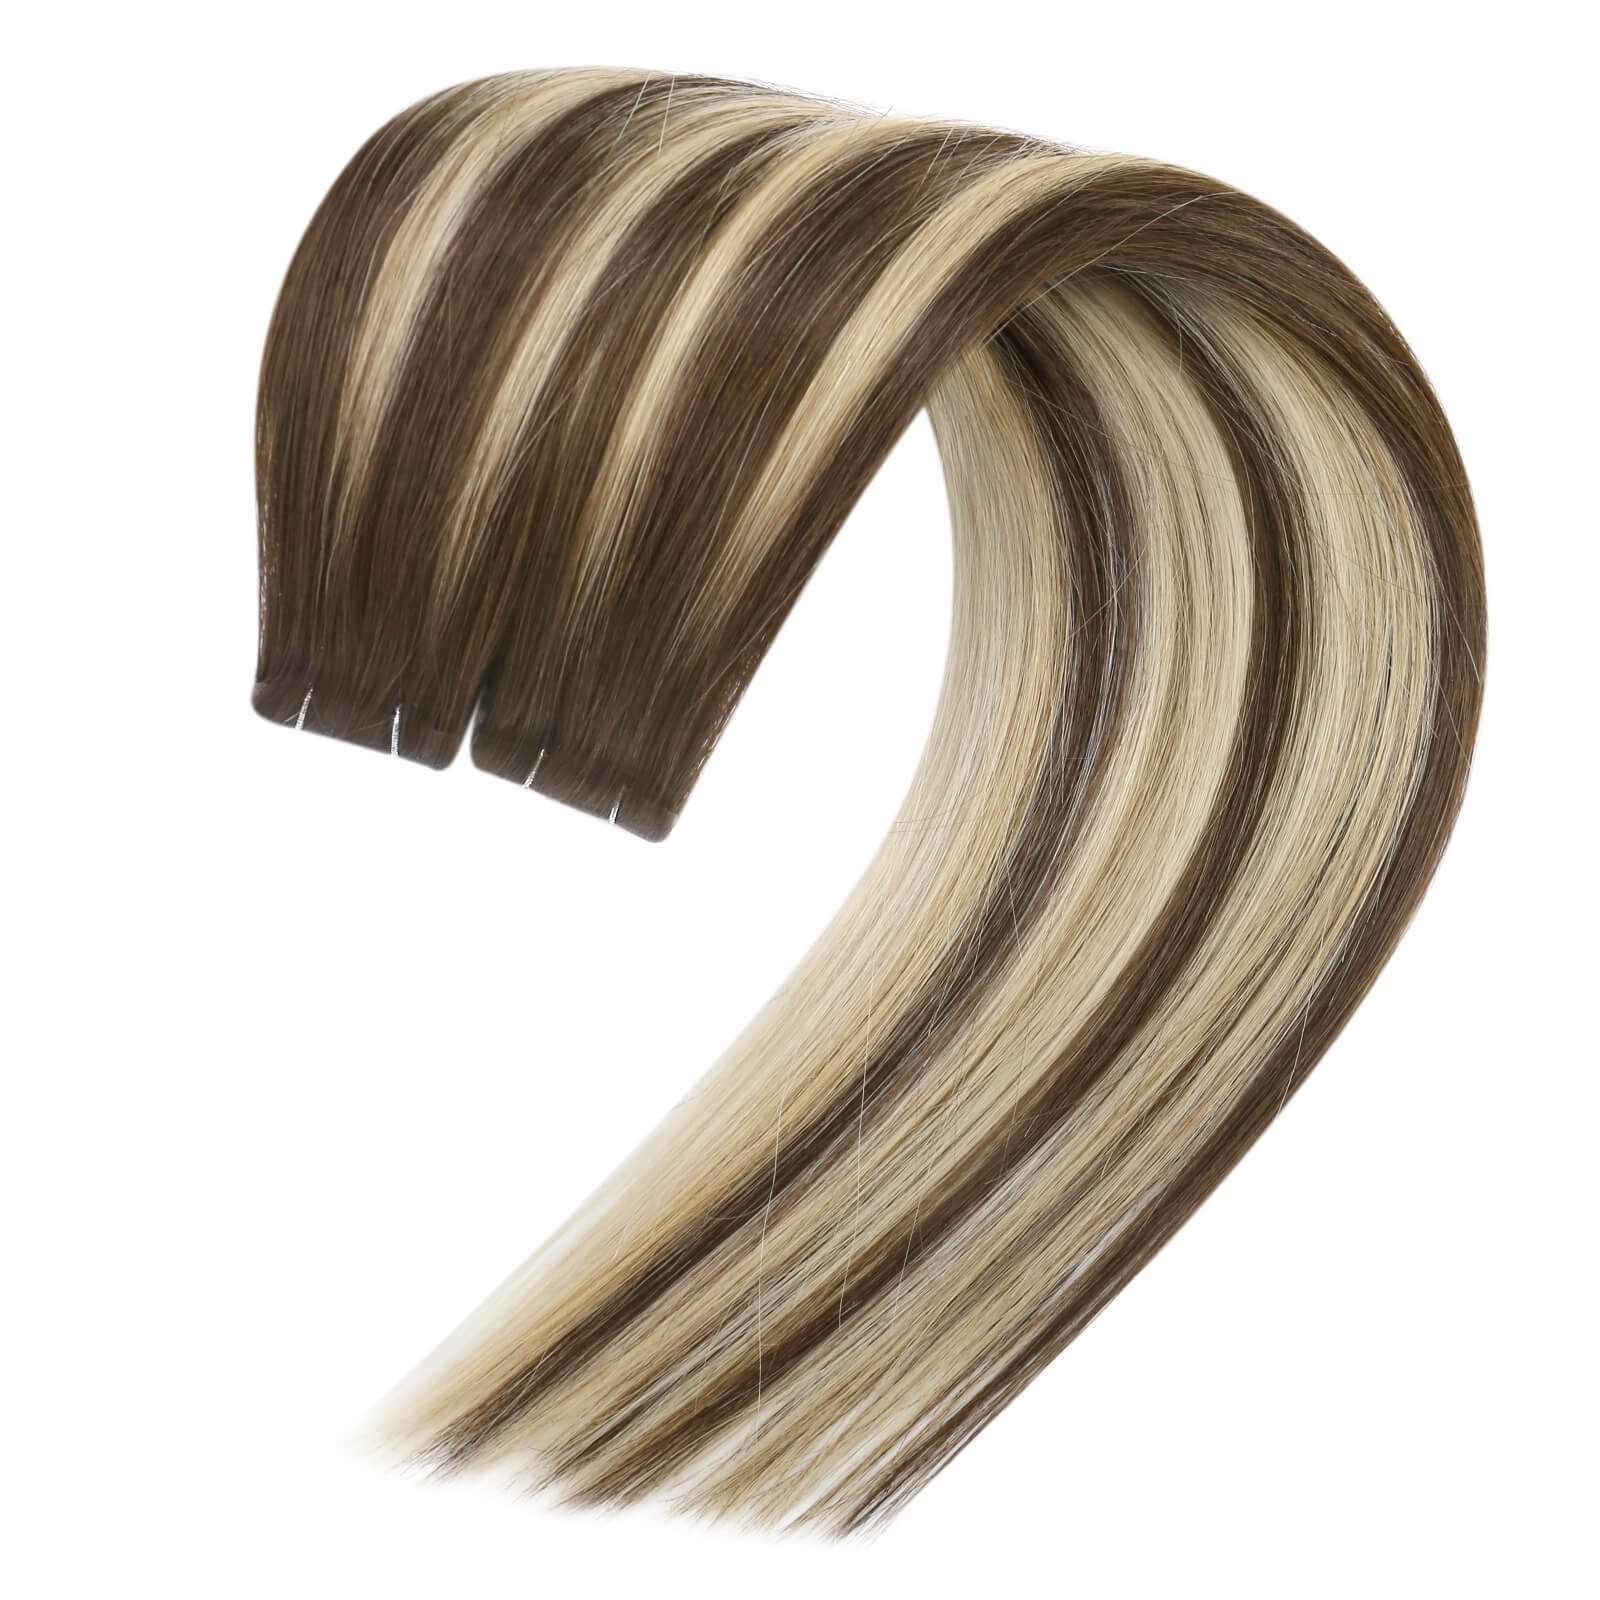 real seamless tape in hair, natural tape on virgin hair, tape in hair extensions, best tape in hair extensions, tape in extensions human hair, sunny hair, professional hair, long life hair